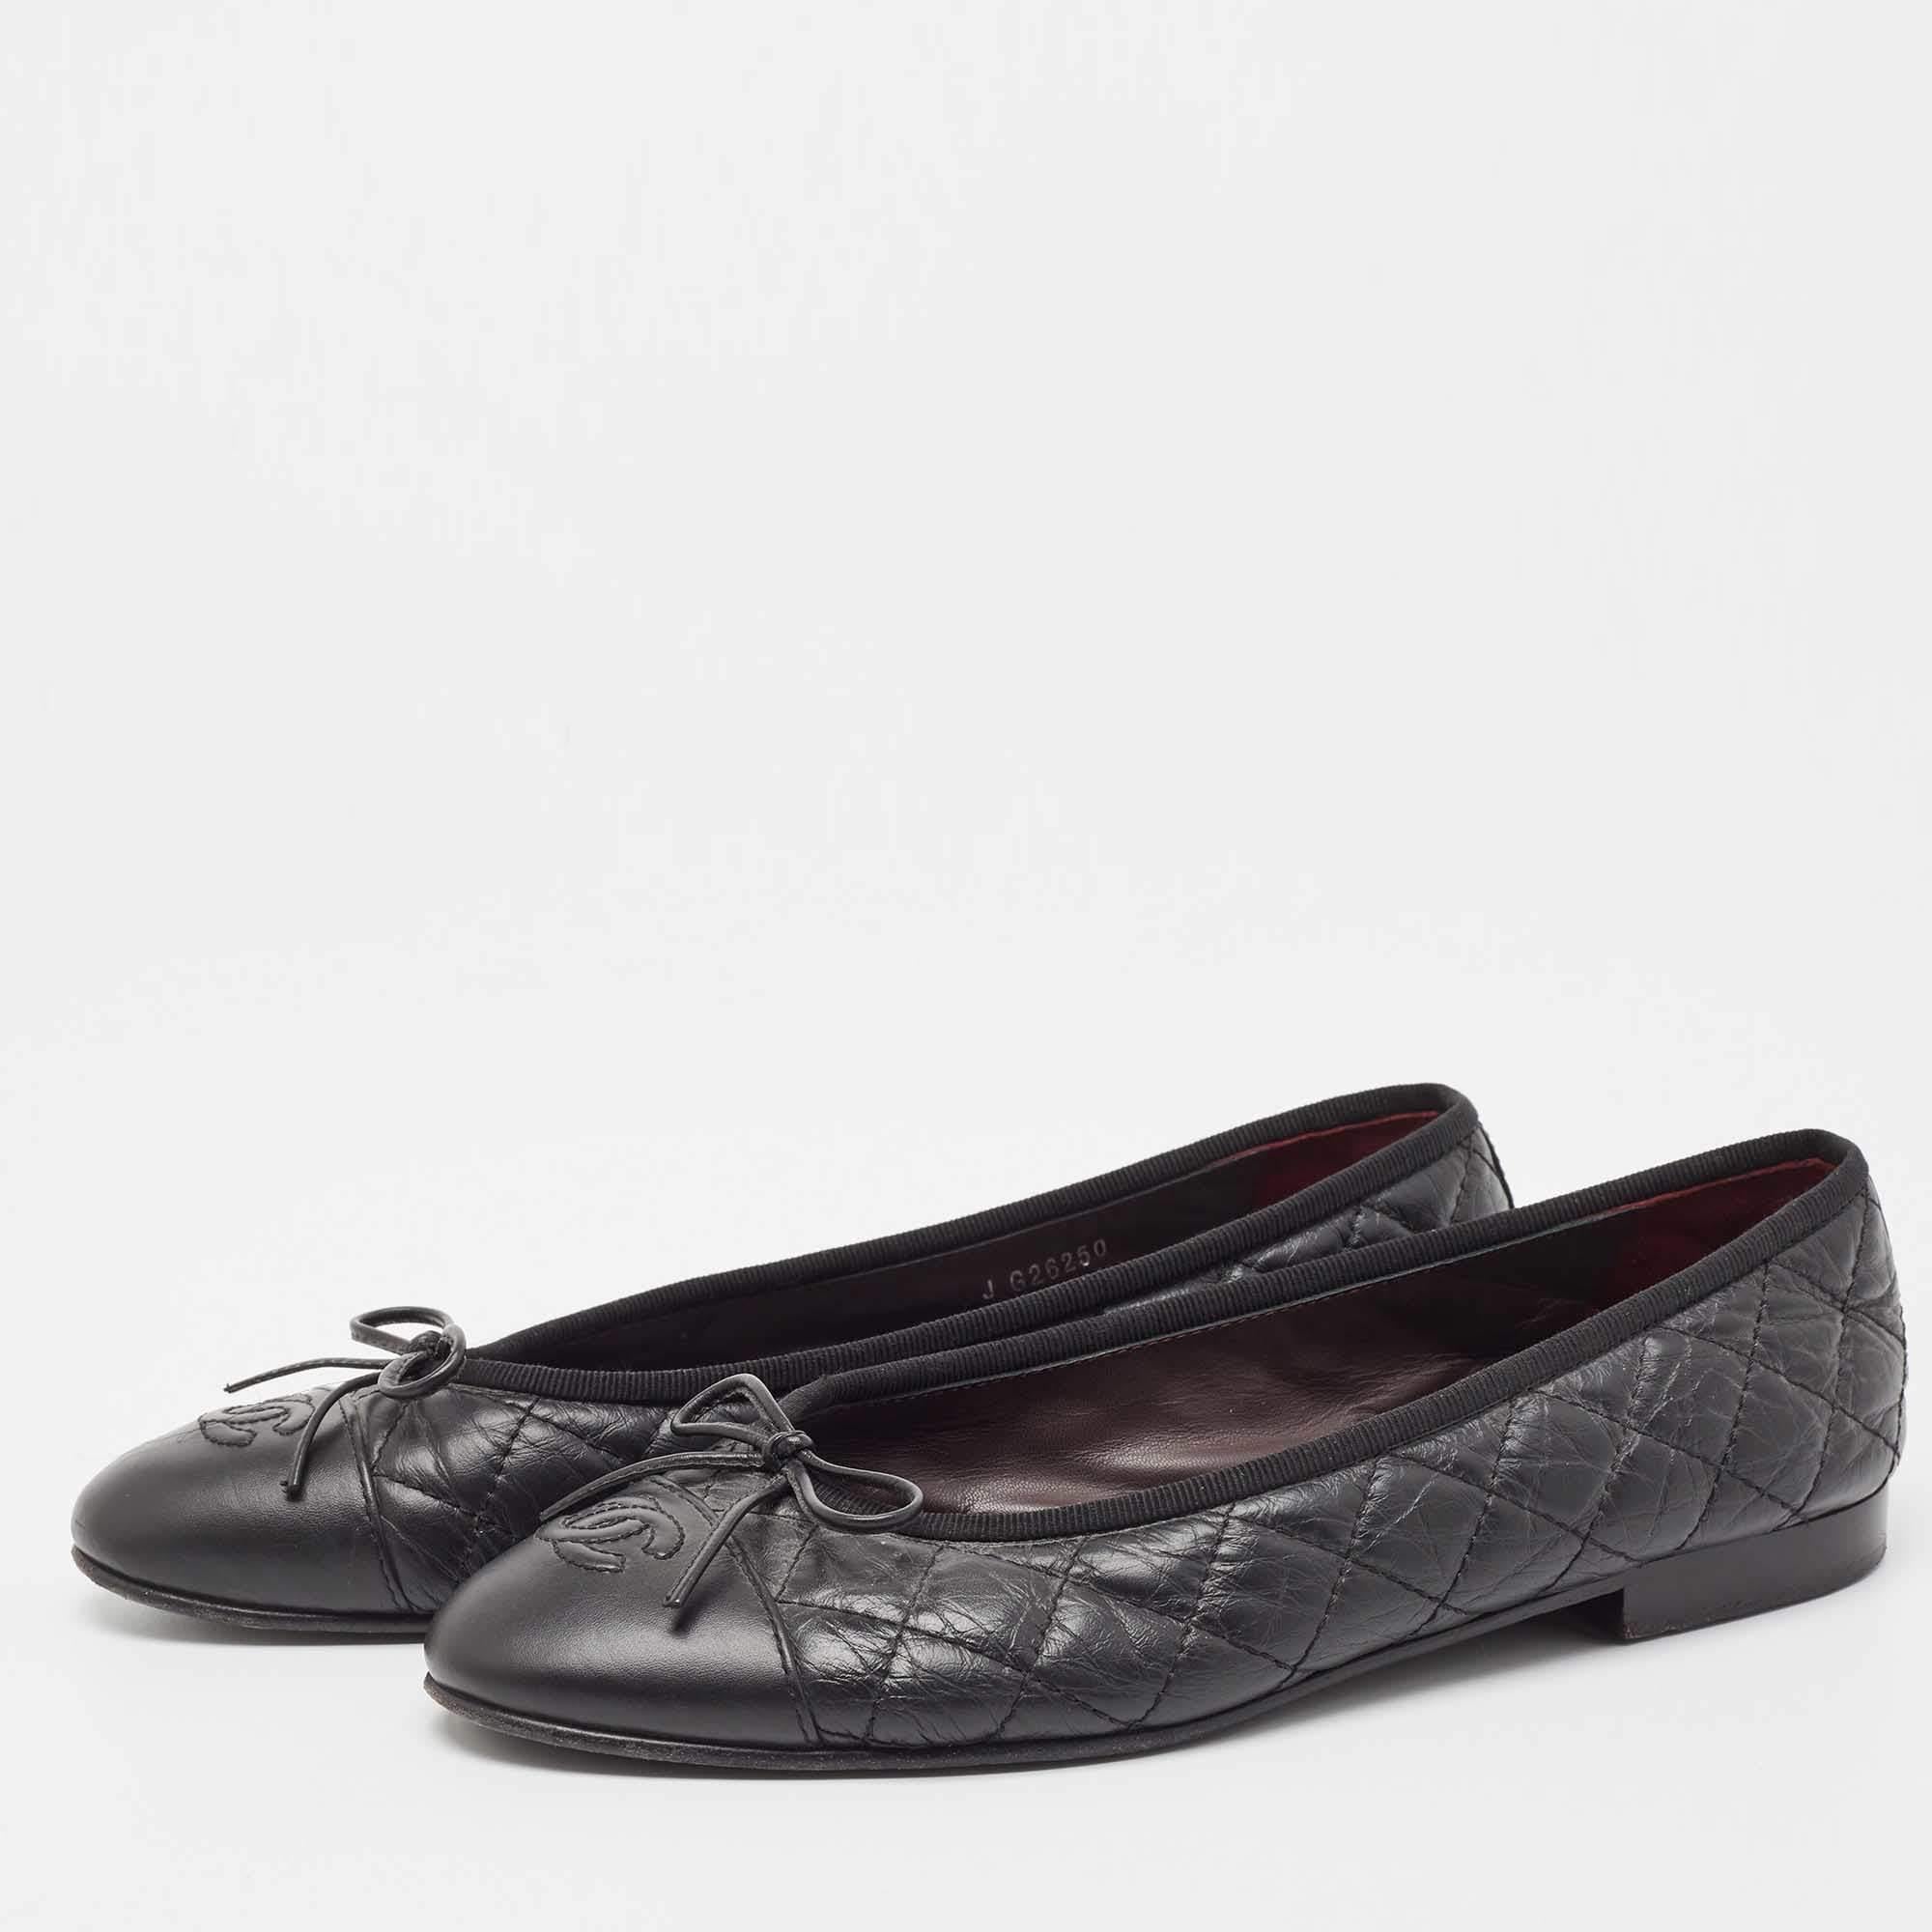 Complete your look by adding these Chanel ballet flats to your lovely wardrobe. They are crafted skilfully to grant the perfect fit and style.

